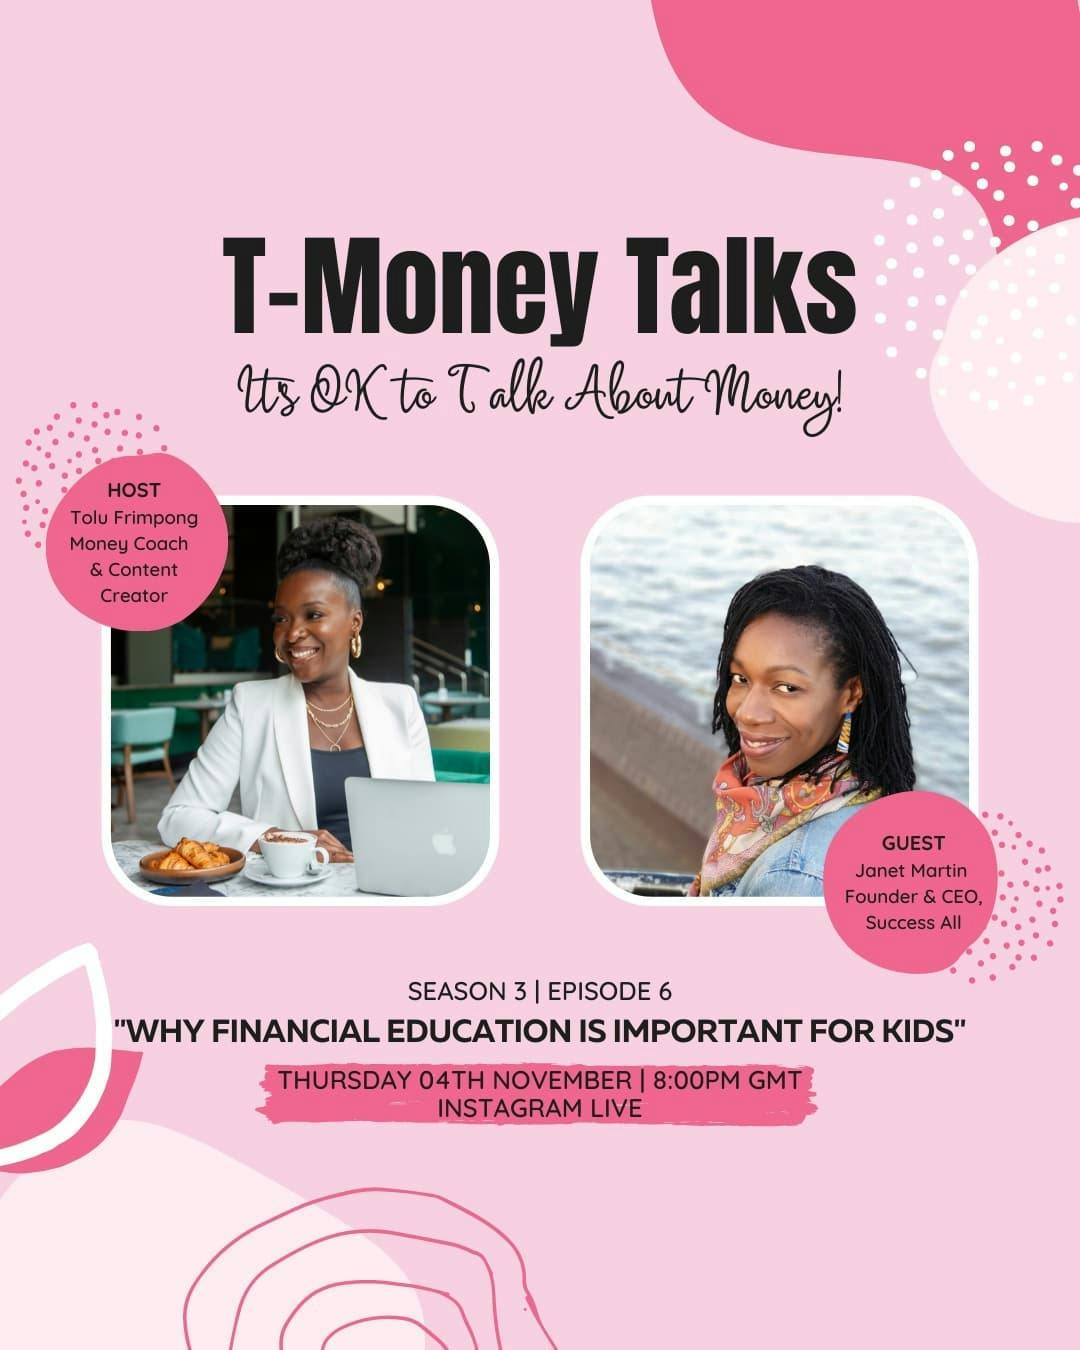 I'm excited to announce my guest for the final episode of season 3 of T-Money Talks is Janet Martin, founder of @successall1.

We'll be discussing the importance of financial education for kids and practical tips to help parents introduce the topic of money to their children.

Tune in tomorrow at 8pm
#tmoneytalks #Instagramlive #instalive  #debtfreeliving #tmoneytalks #conversationsaboutmoney #ukdebtfreecommunity #debtfreecommunityuk #debtfreecommunity #blackpfcommunity #savemoney #makemoneyonline #specialguest #realtalk #moneymotivation